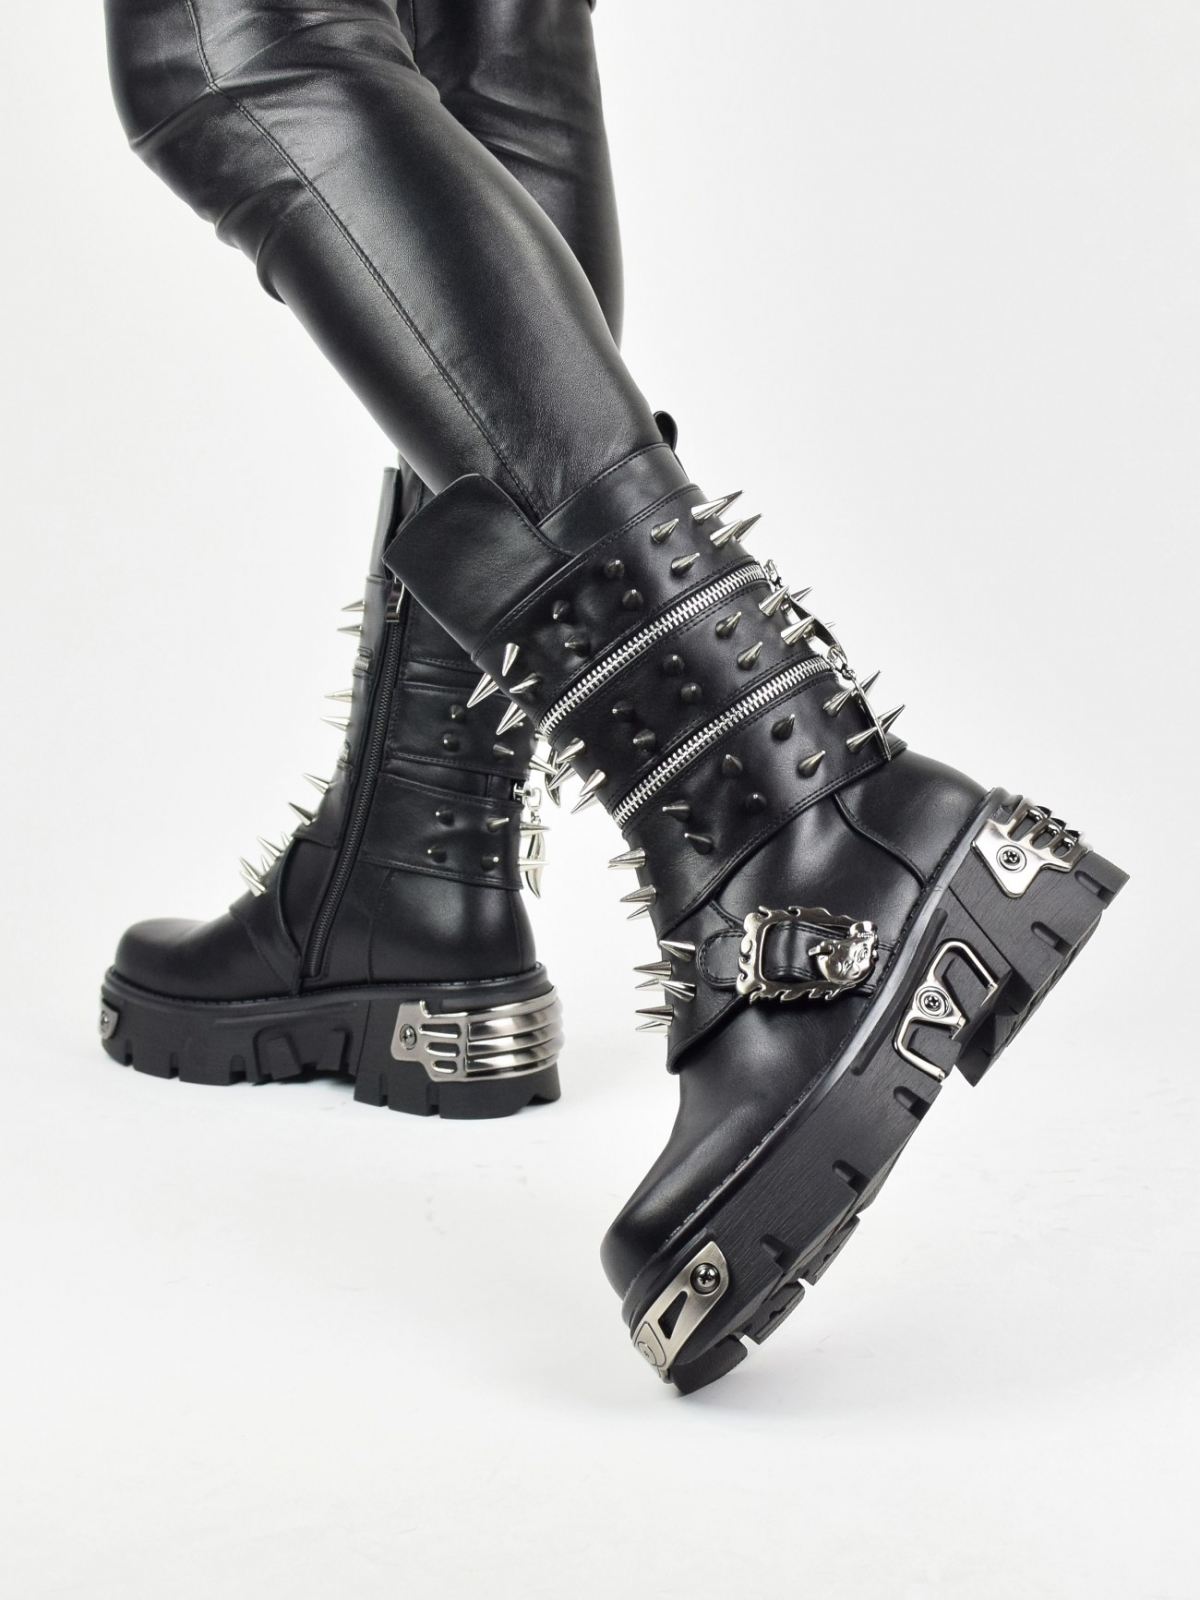 Cyberpunk style ankle boots with metal details in black